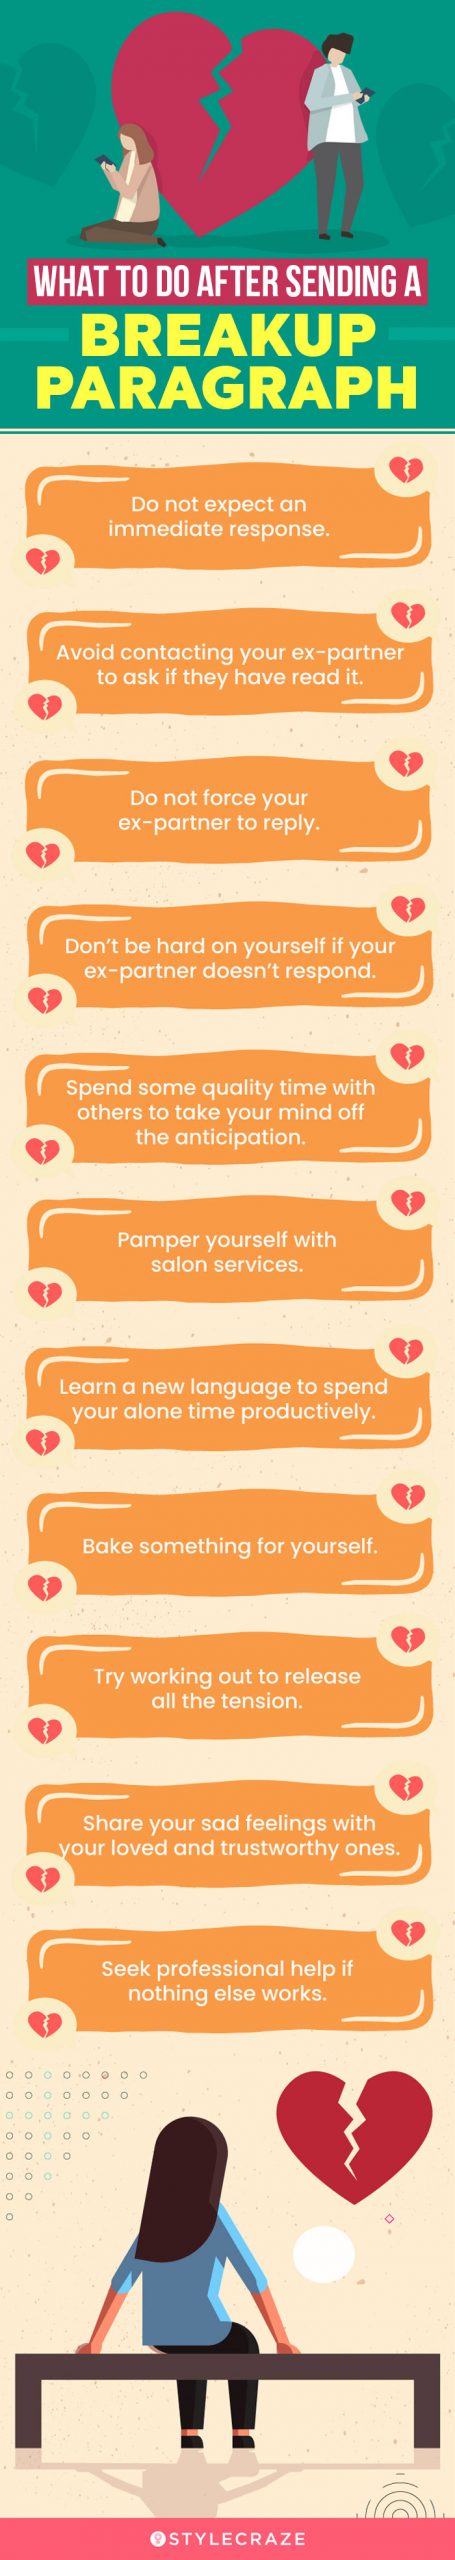 what to do after sending breakup paragraph (infographic)